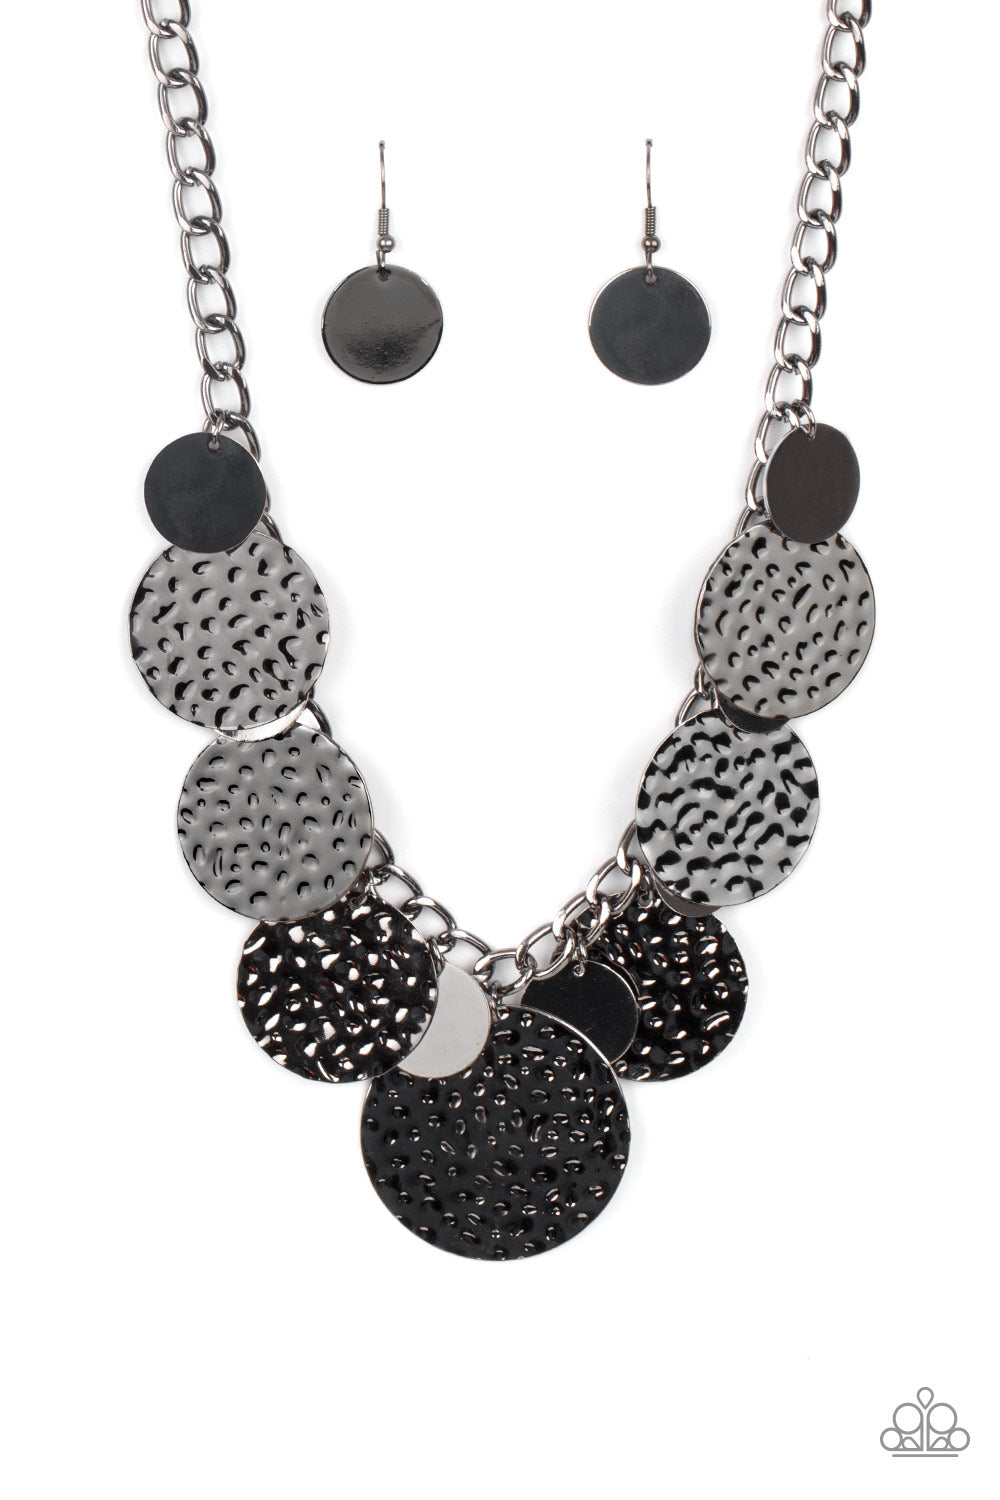 Industrial Grade Glamour - black - Paparazzi necklace